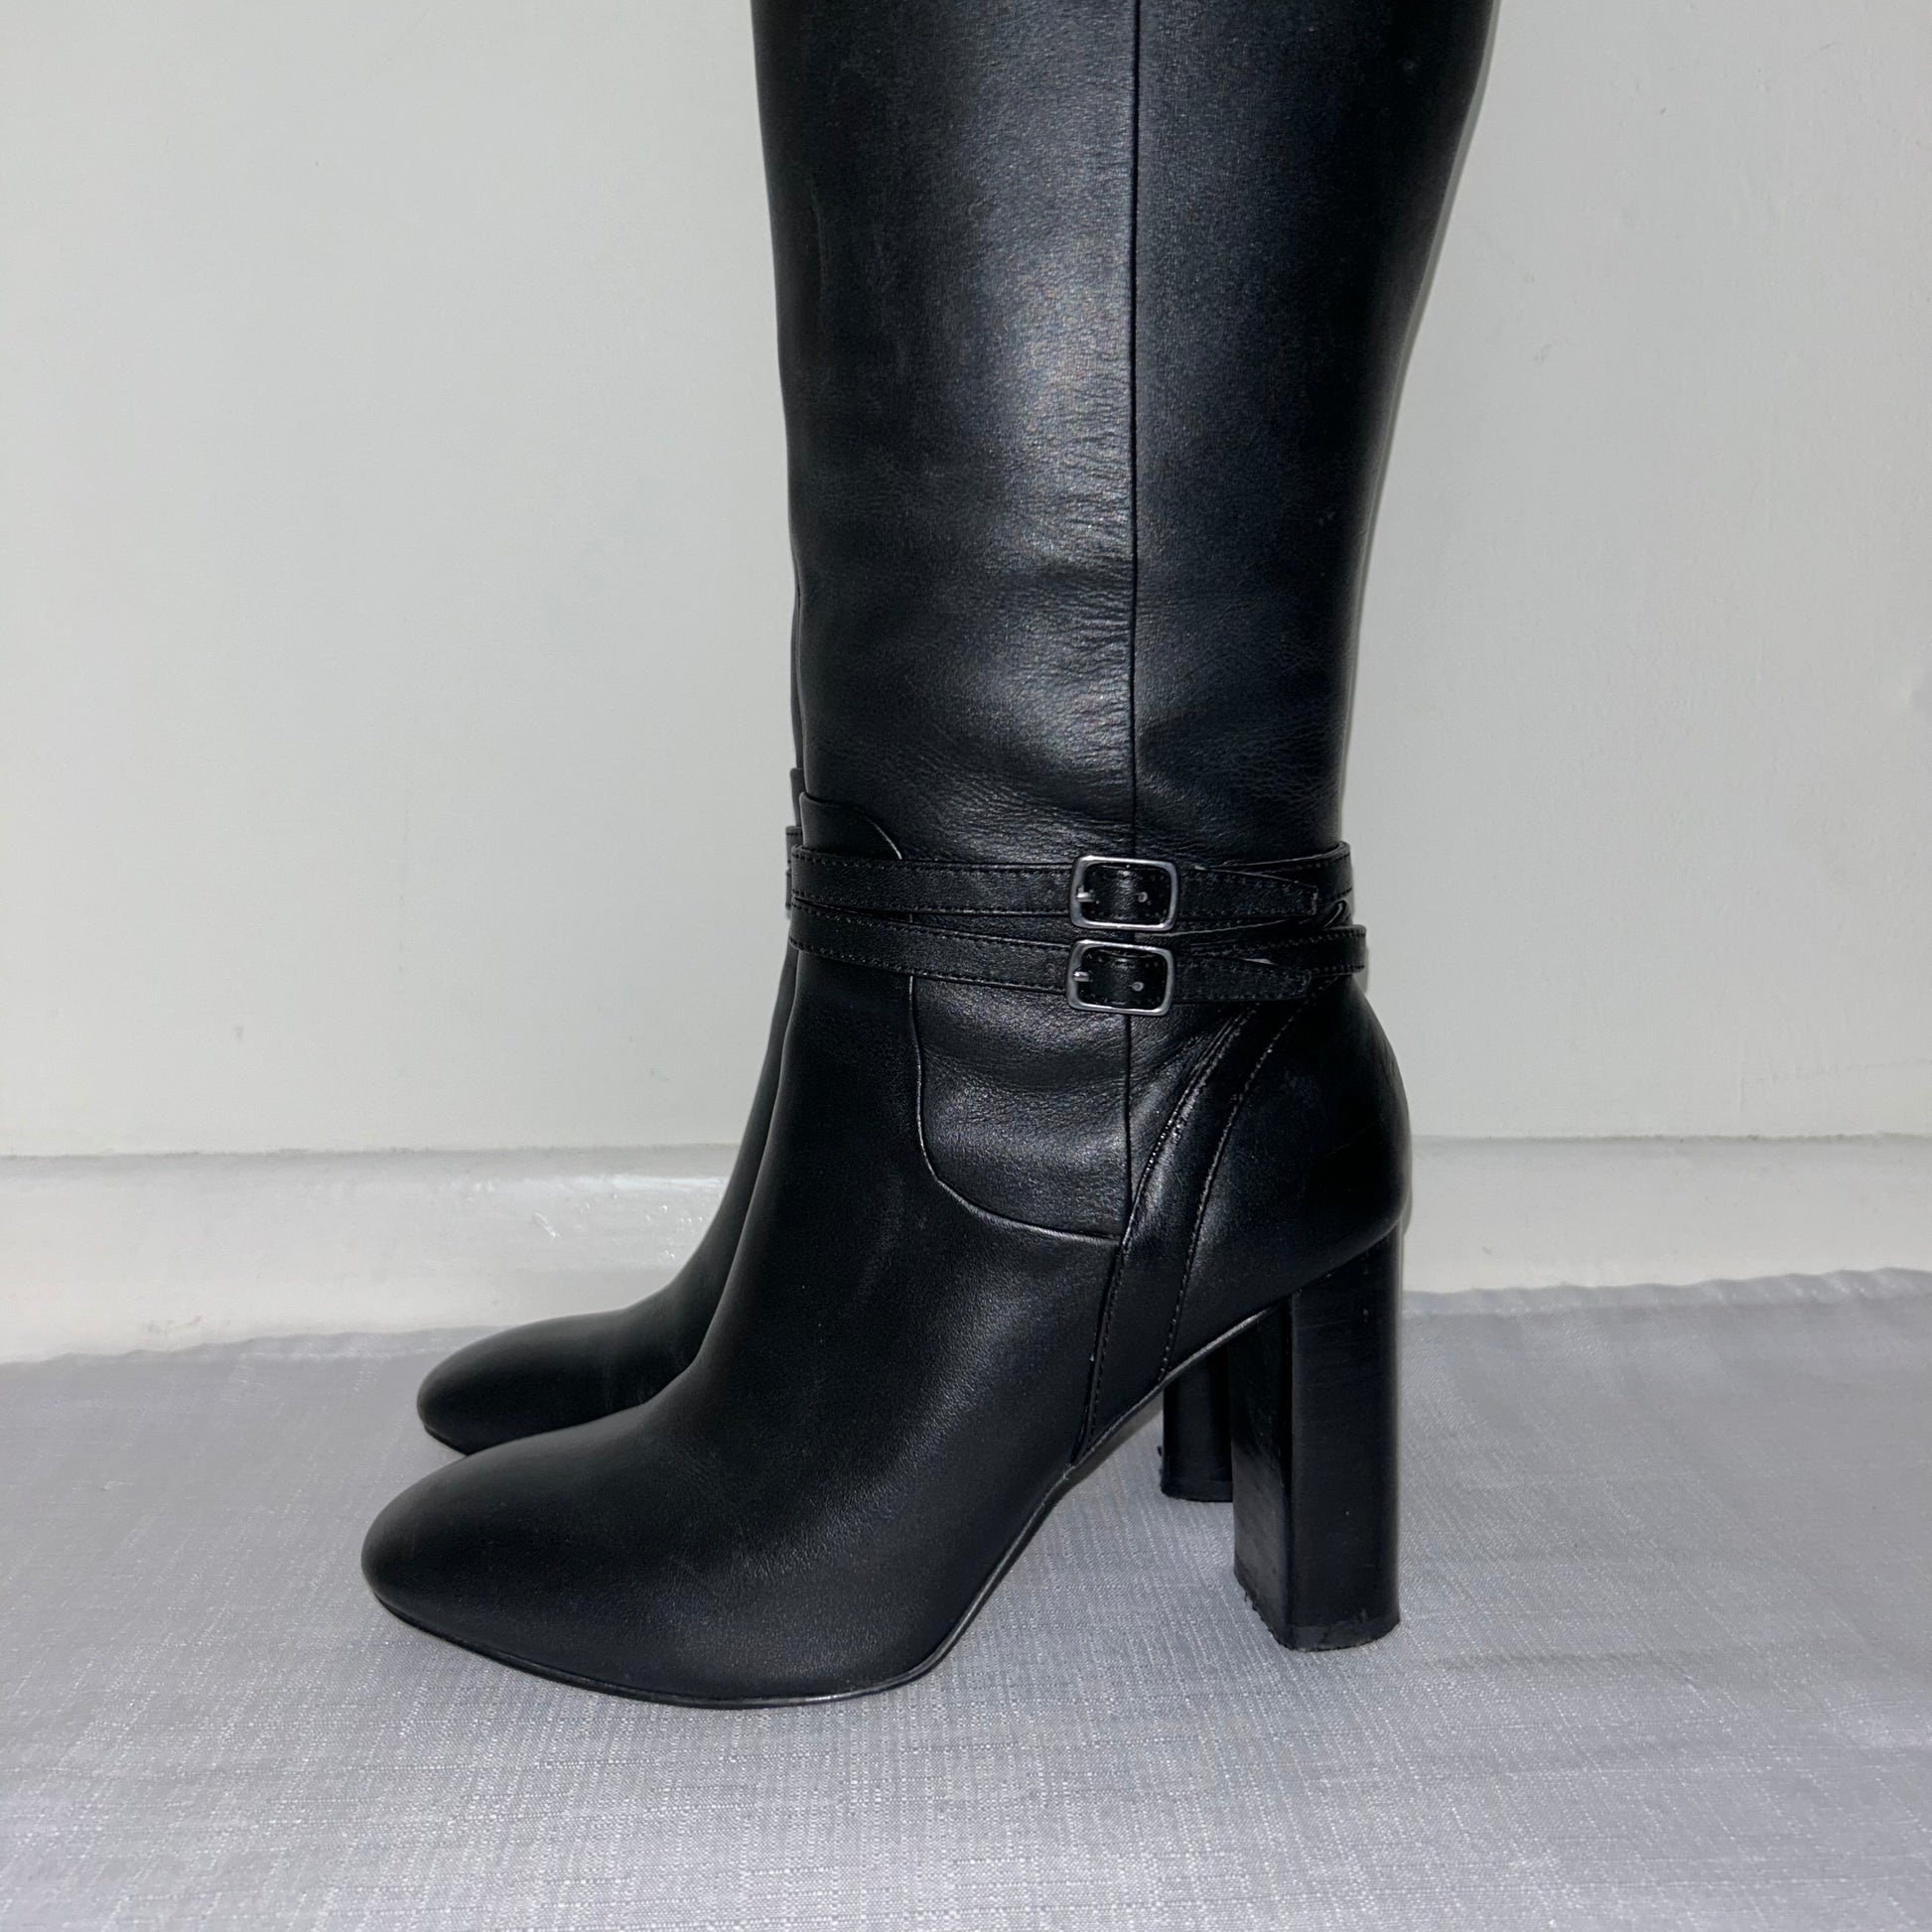 close up of black knee high boots with double silver buckle shown on a white background